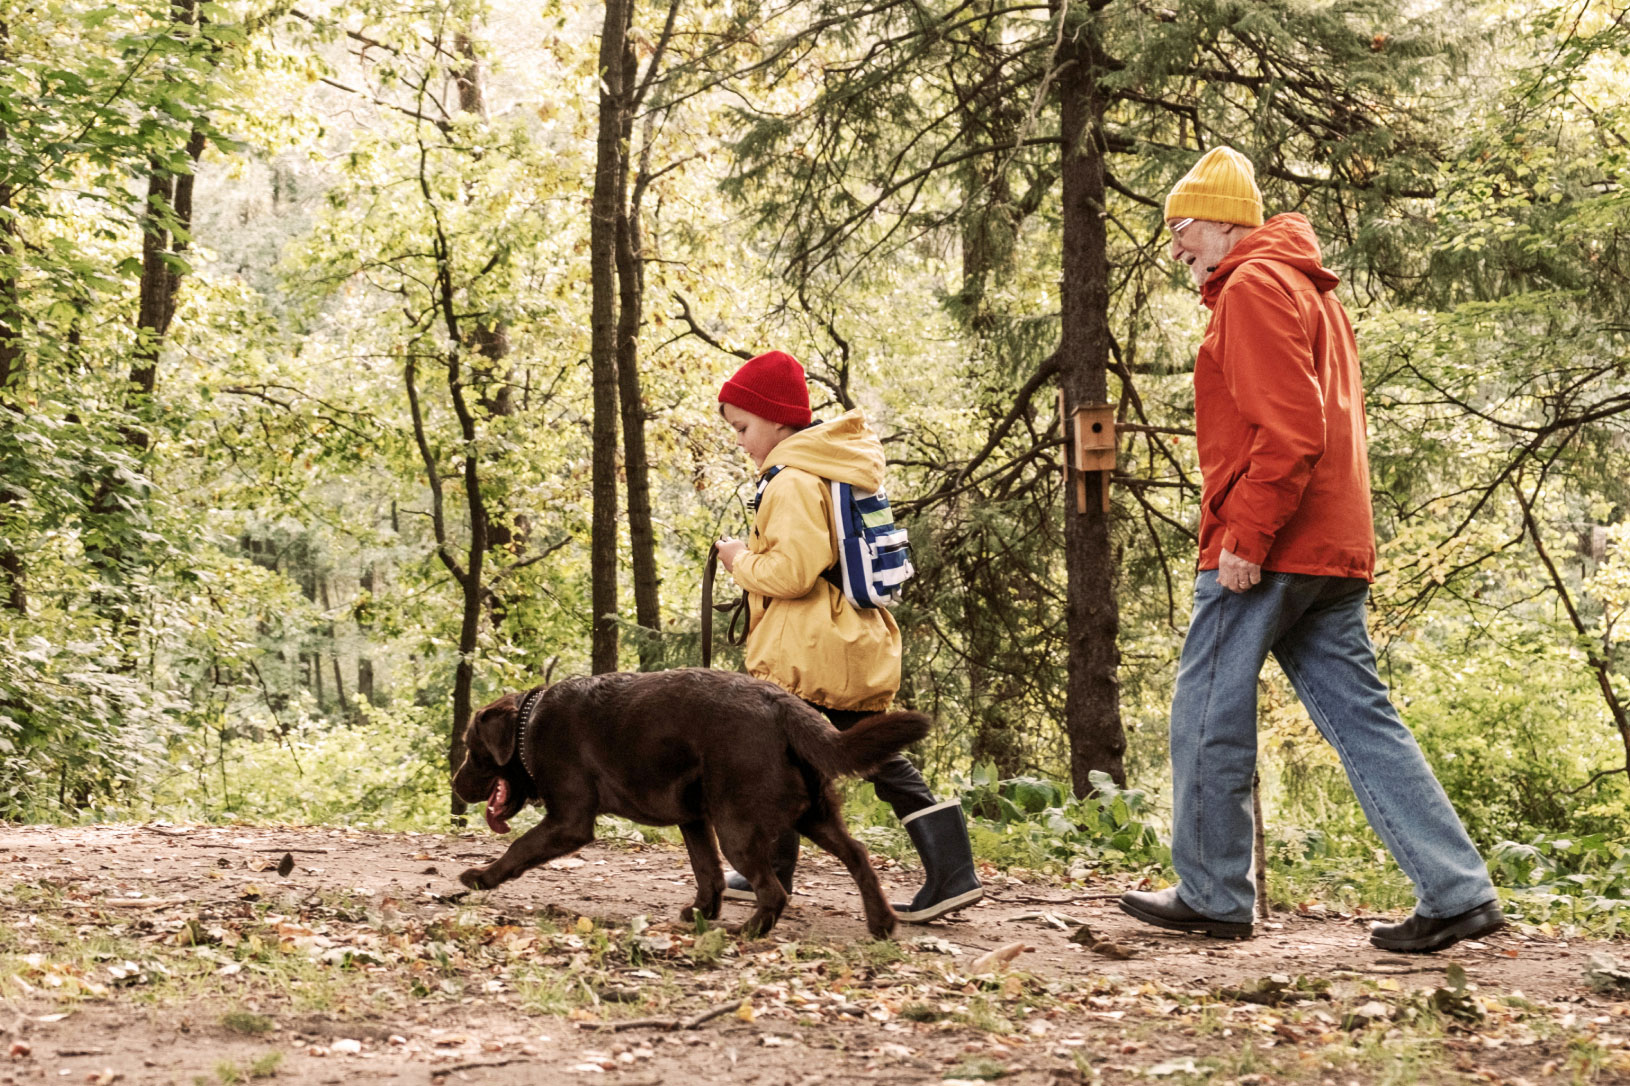 A senior man and a child in nature, walking a dog.